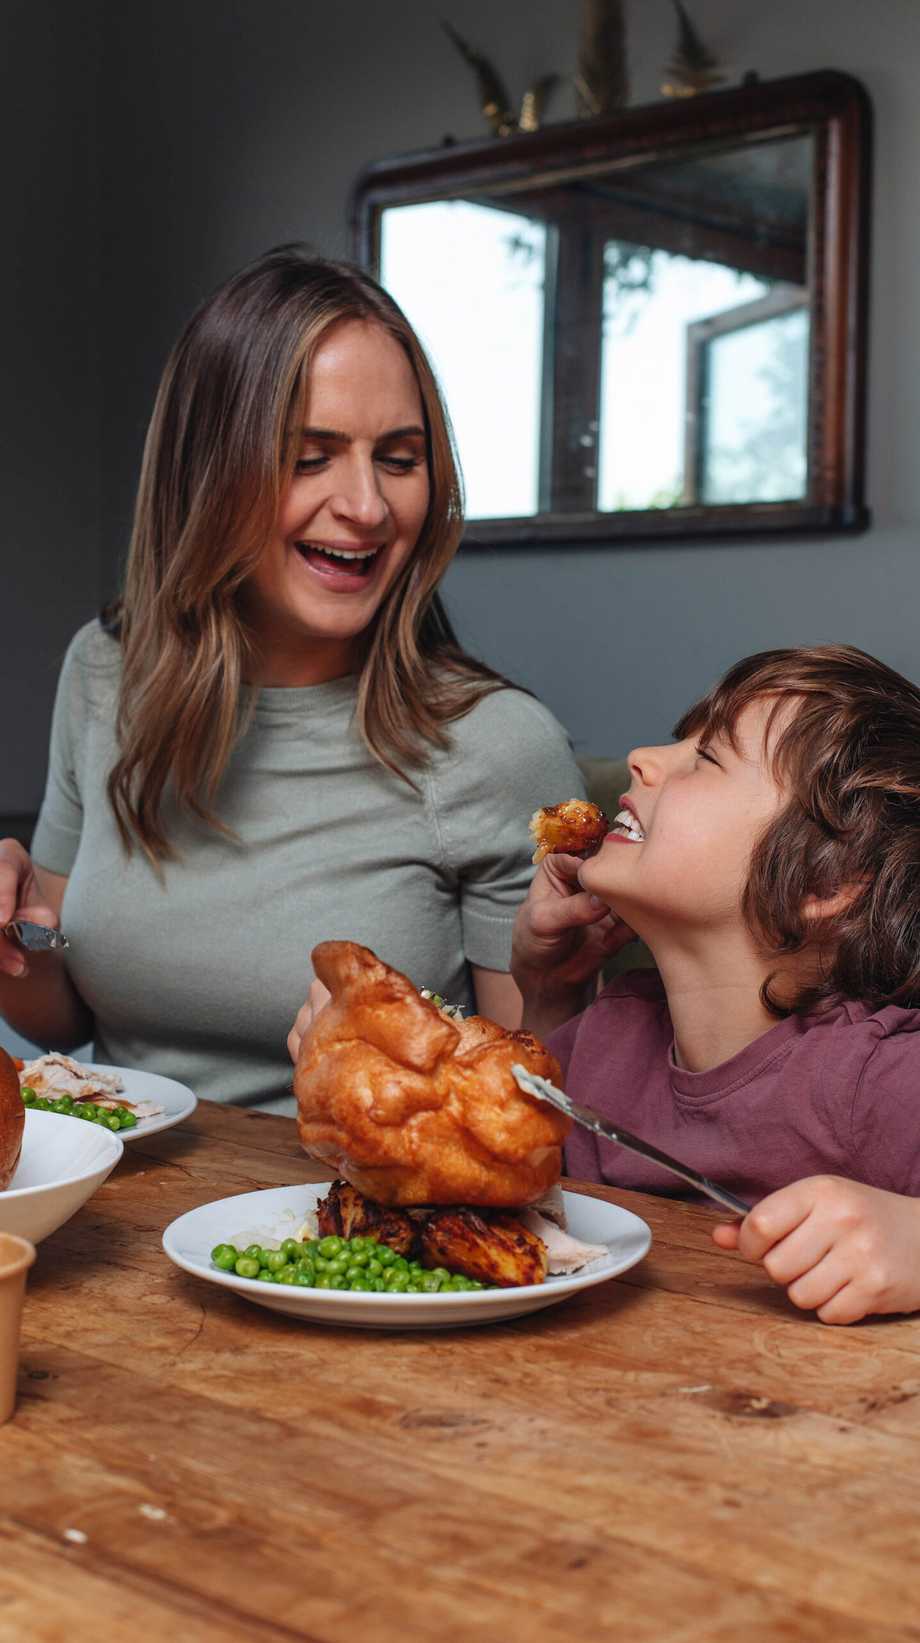 A mum feeds her son a piece of roast chicken from her force. The boy smiles, a large roast chicken and peas on his plate.